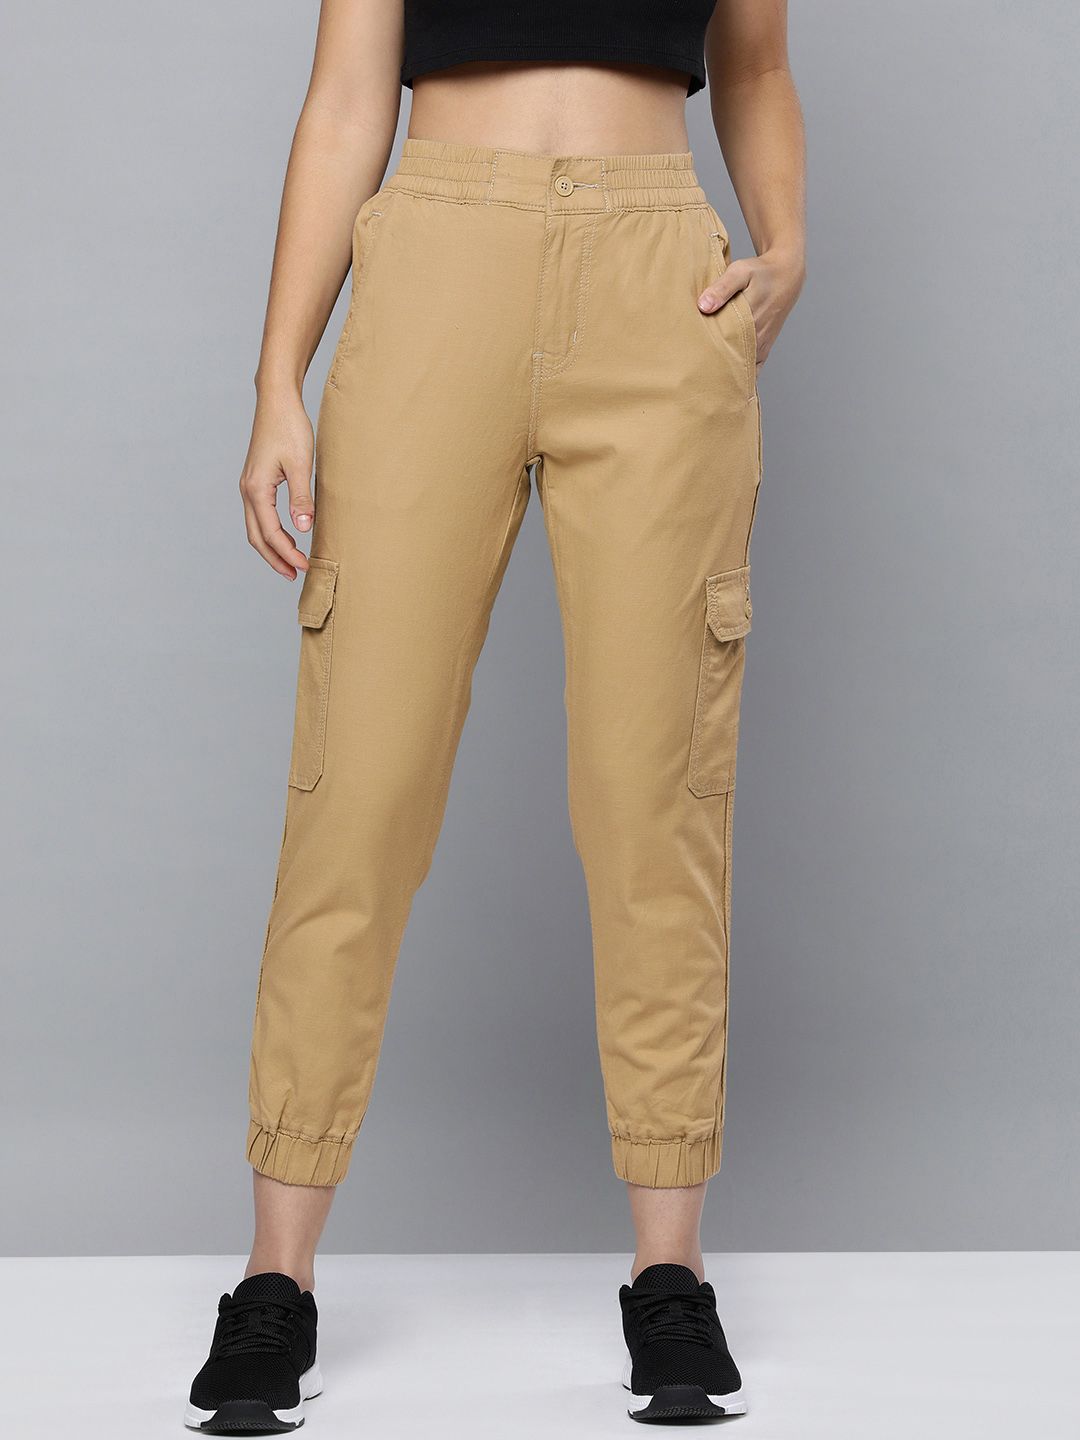 Levis Women Khaki Solid Joggers Price in India